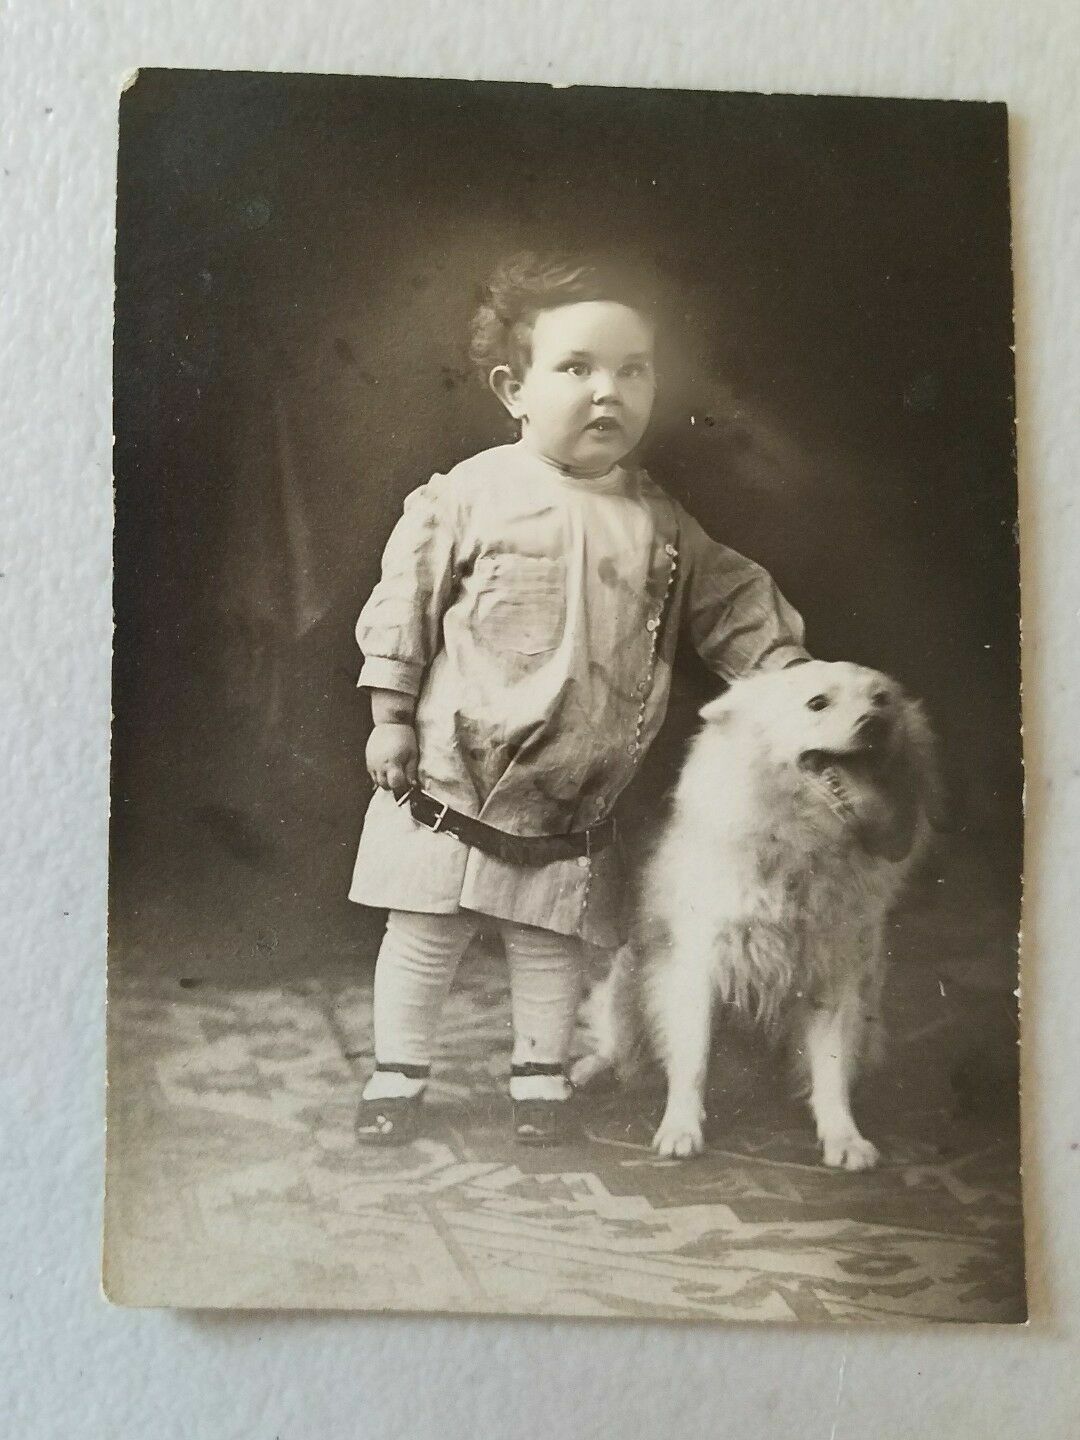 MAGNIFICENT LOVING Dog and Boy 1900s VINTAGE PHOTO 